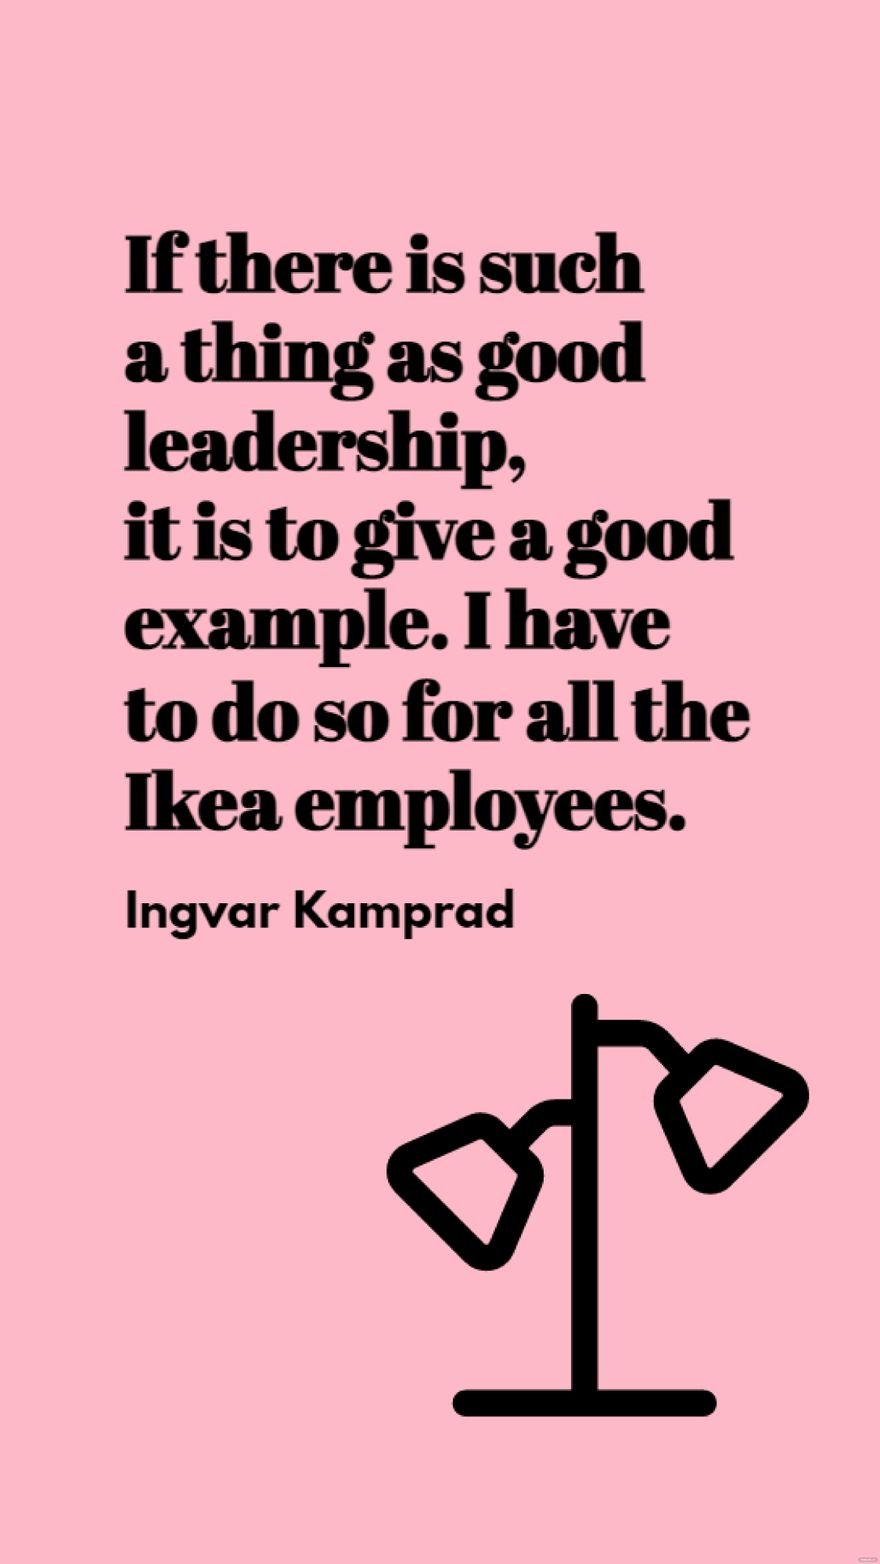 Free Ingvar Kamprad - If there is such a thing as good leadership, it is to give a good example. I have to do so for all the Ikea employees. in JPG